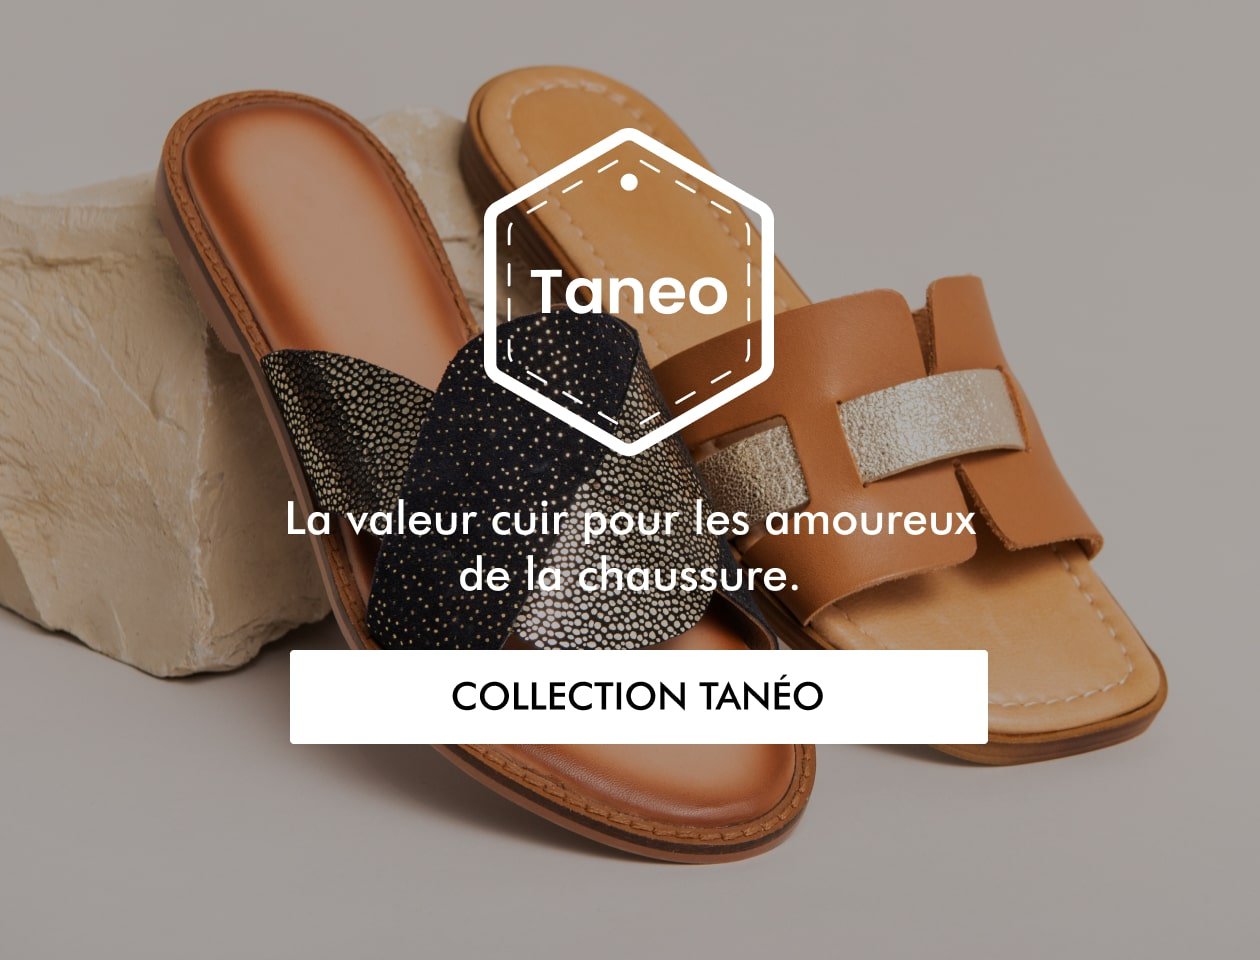 Collection Taneo